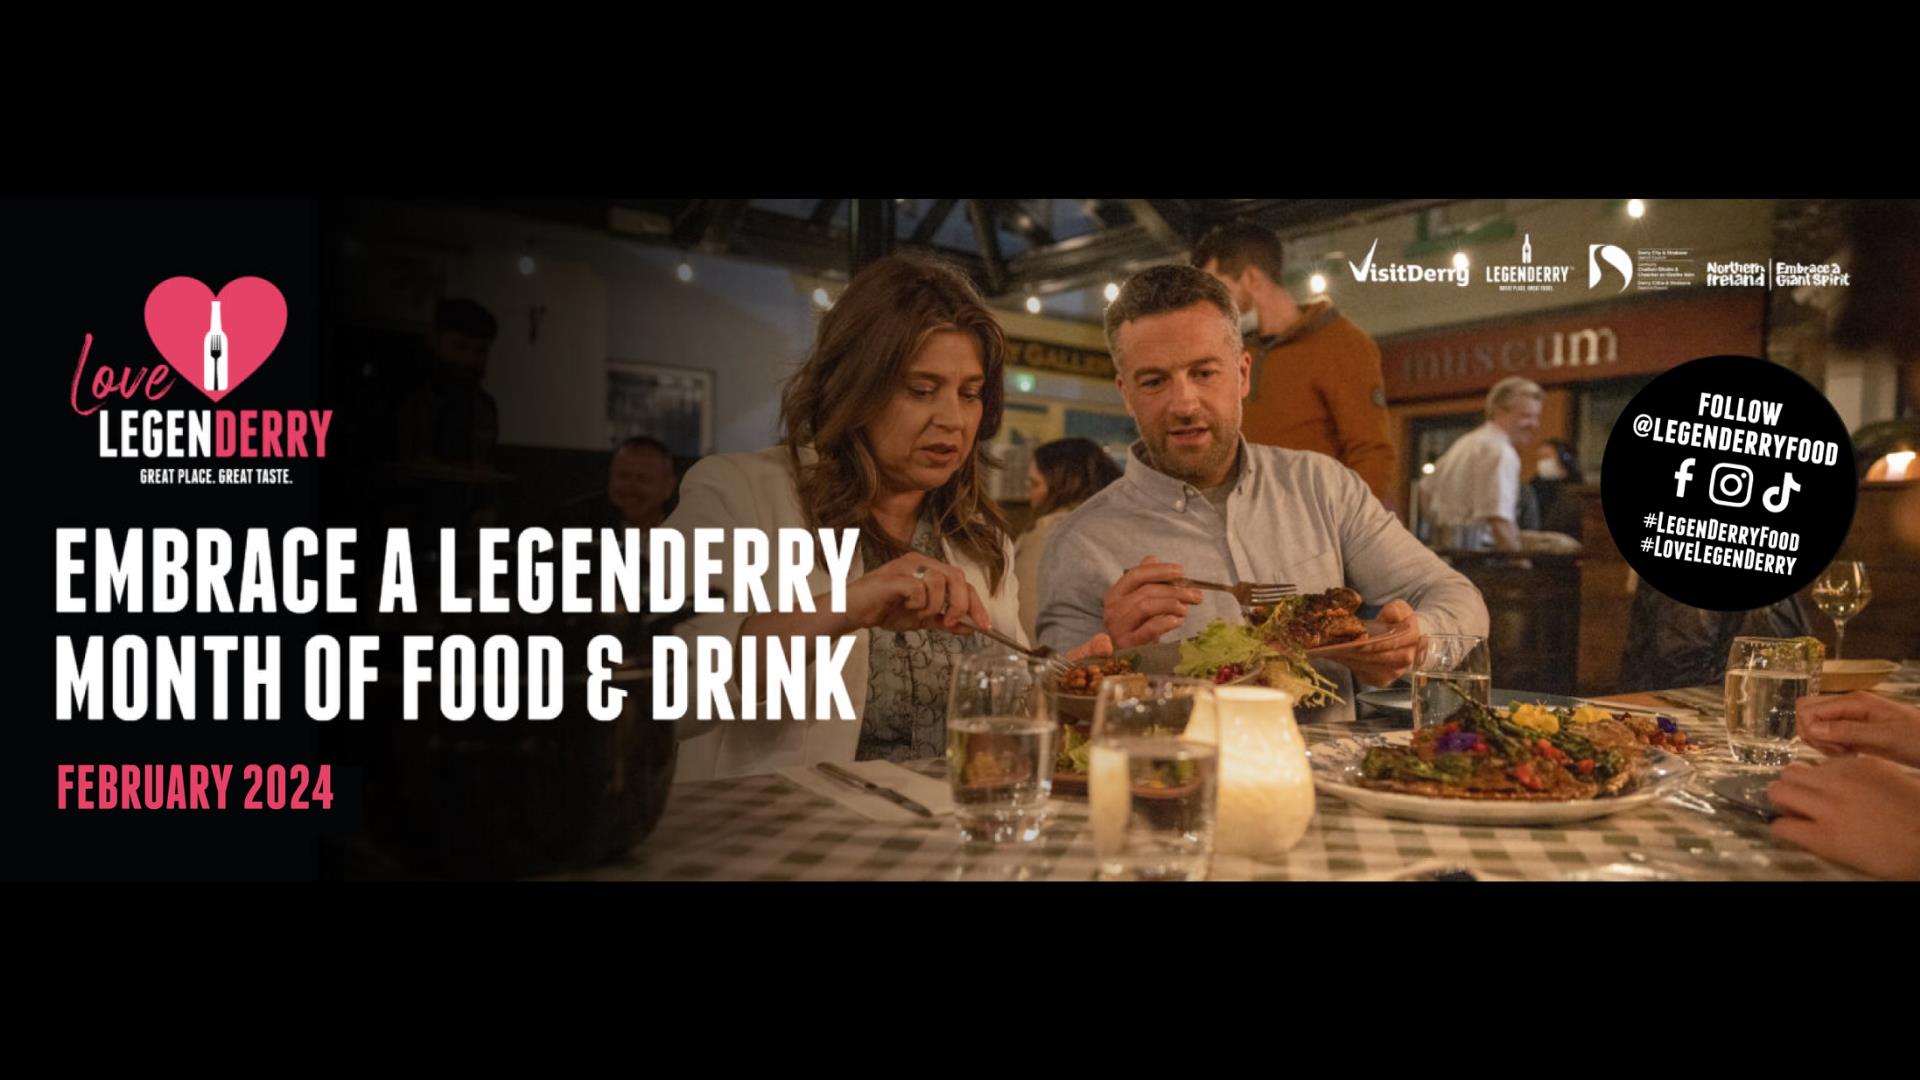 Love LegenDerry - a month of LegenDerry food and drink